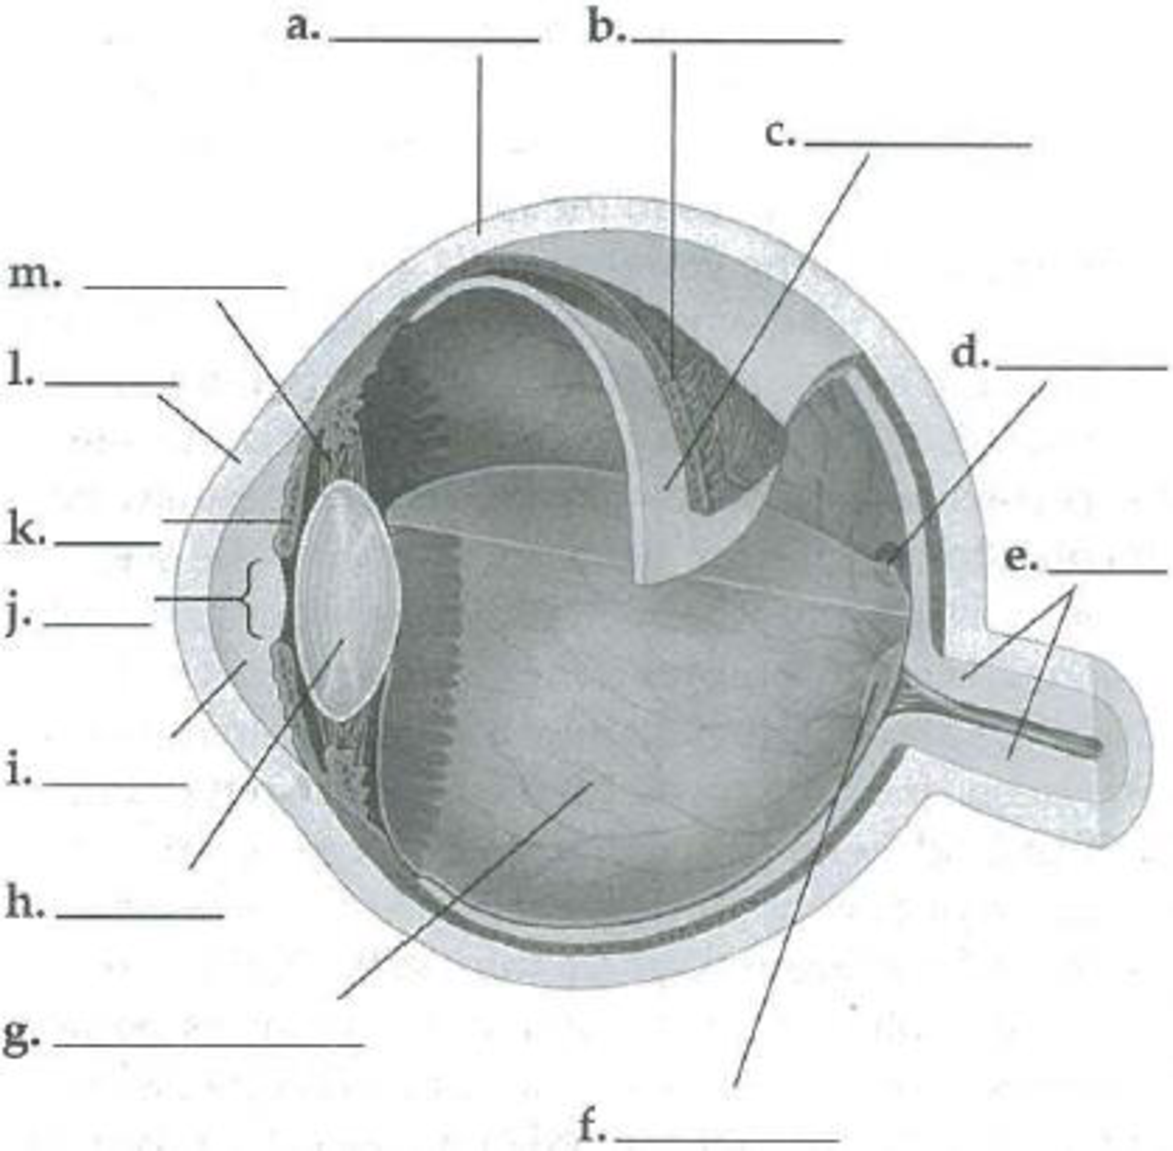 Chapter 50, Problem 4IQ, Label the parts of the human eye in the following illustration. 